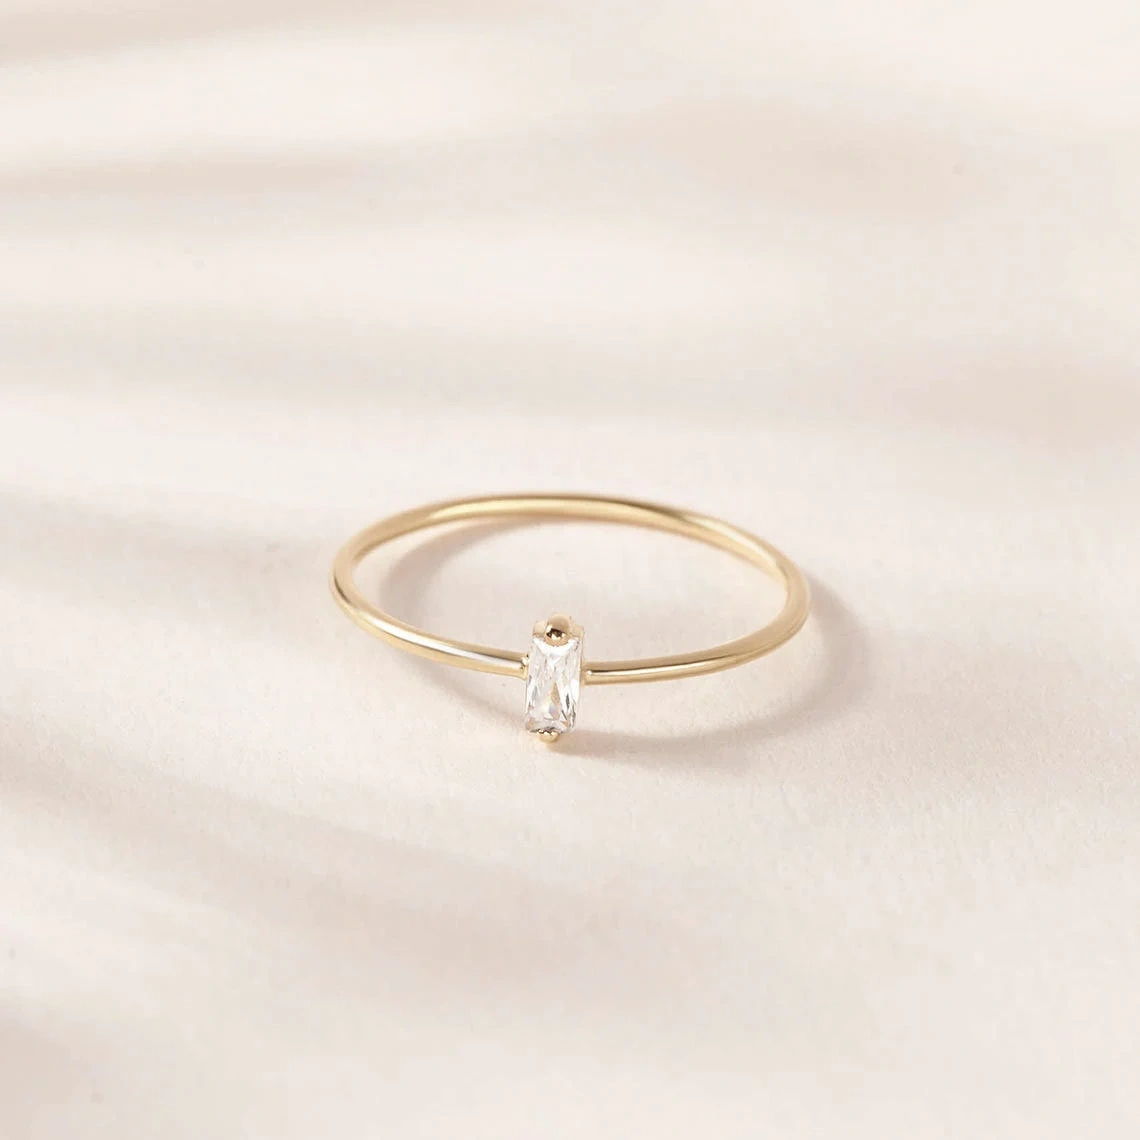 Baguette White Crystal 10K Solid Gold Ring Dainty Clear Crystal Prong Set Minimalist Delicate Ring Light Weighted Inset Stone Handmade Ring-10 3/4 US/Uk size – V-1